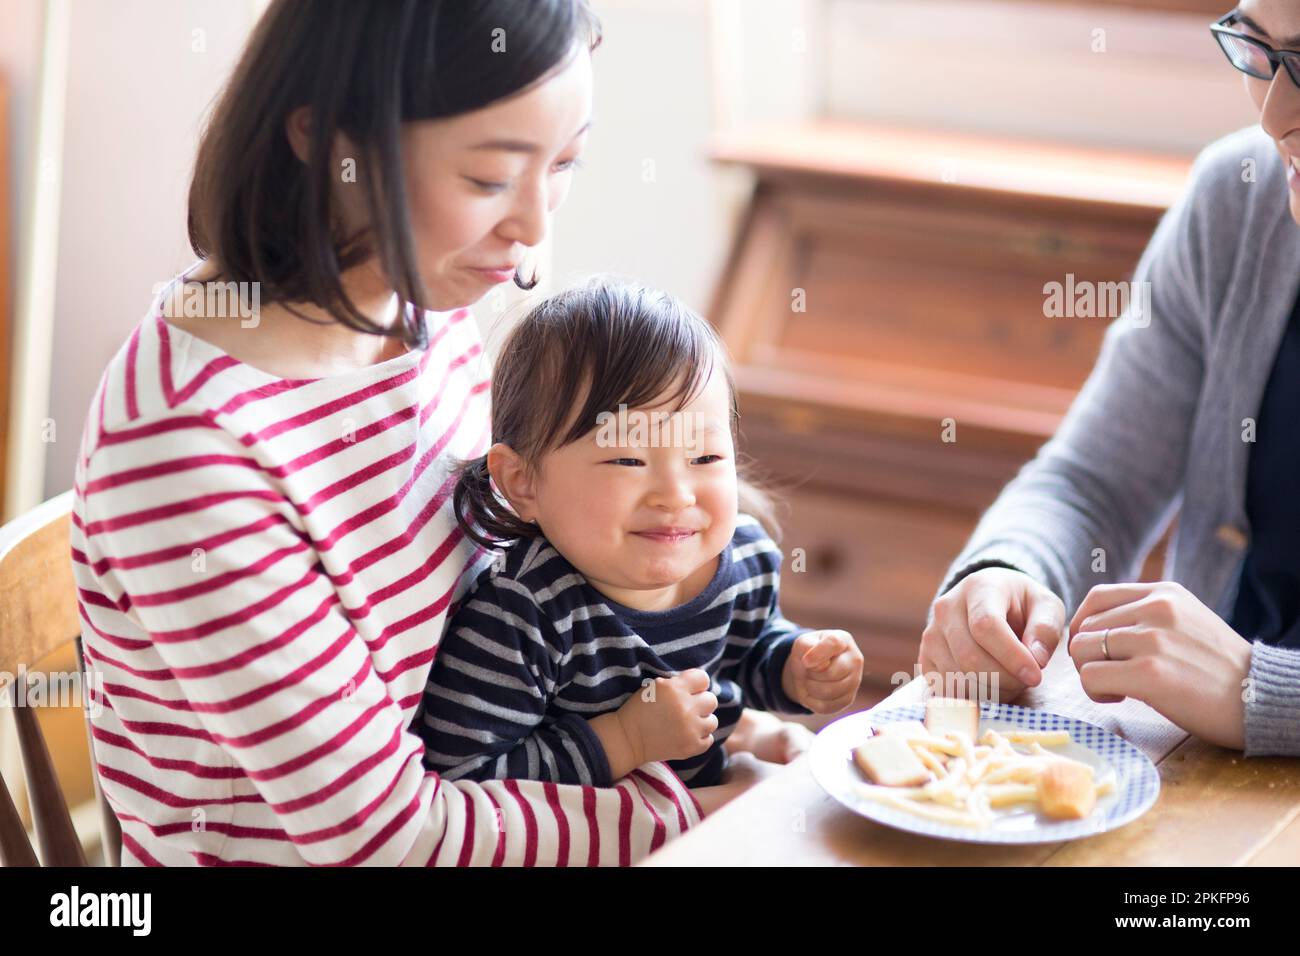 Family eating a snack Stock Photo